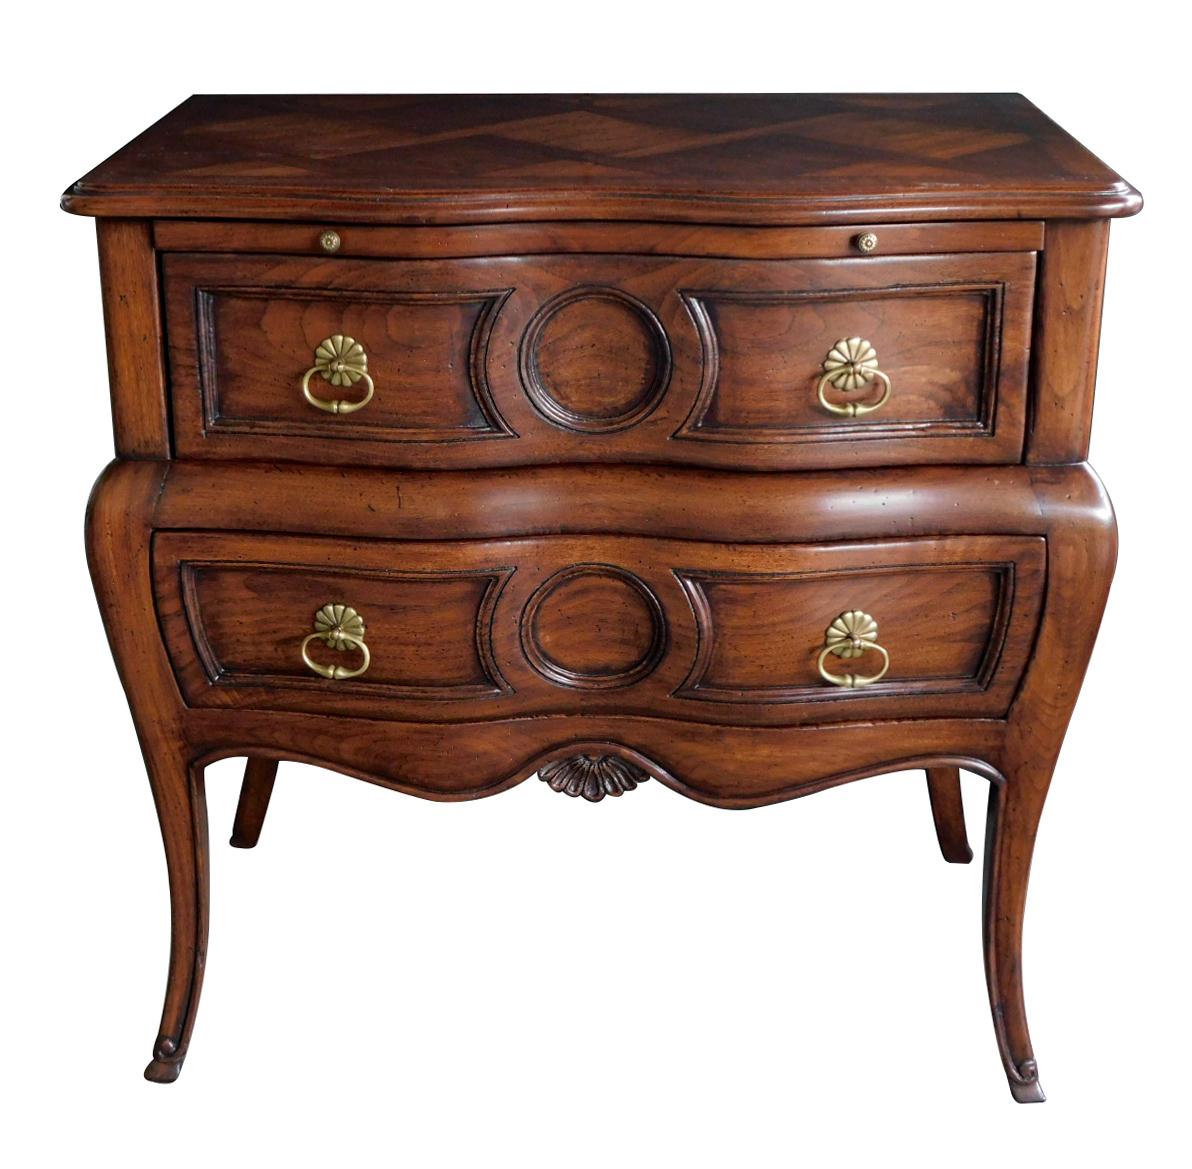 Super good quality with elegant shape and small size, the serpentine parquetry top above a bombé body fitted with 2 oak-lined drawers all raised on splayed legs ending in hoof feet; maker's label 'Auffray & Co. NYC